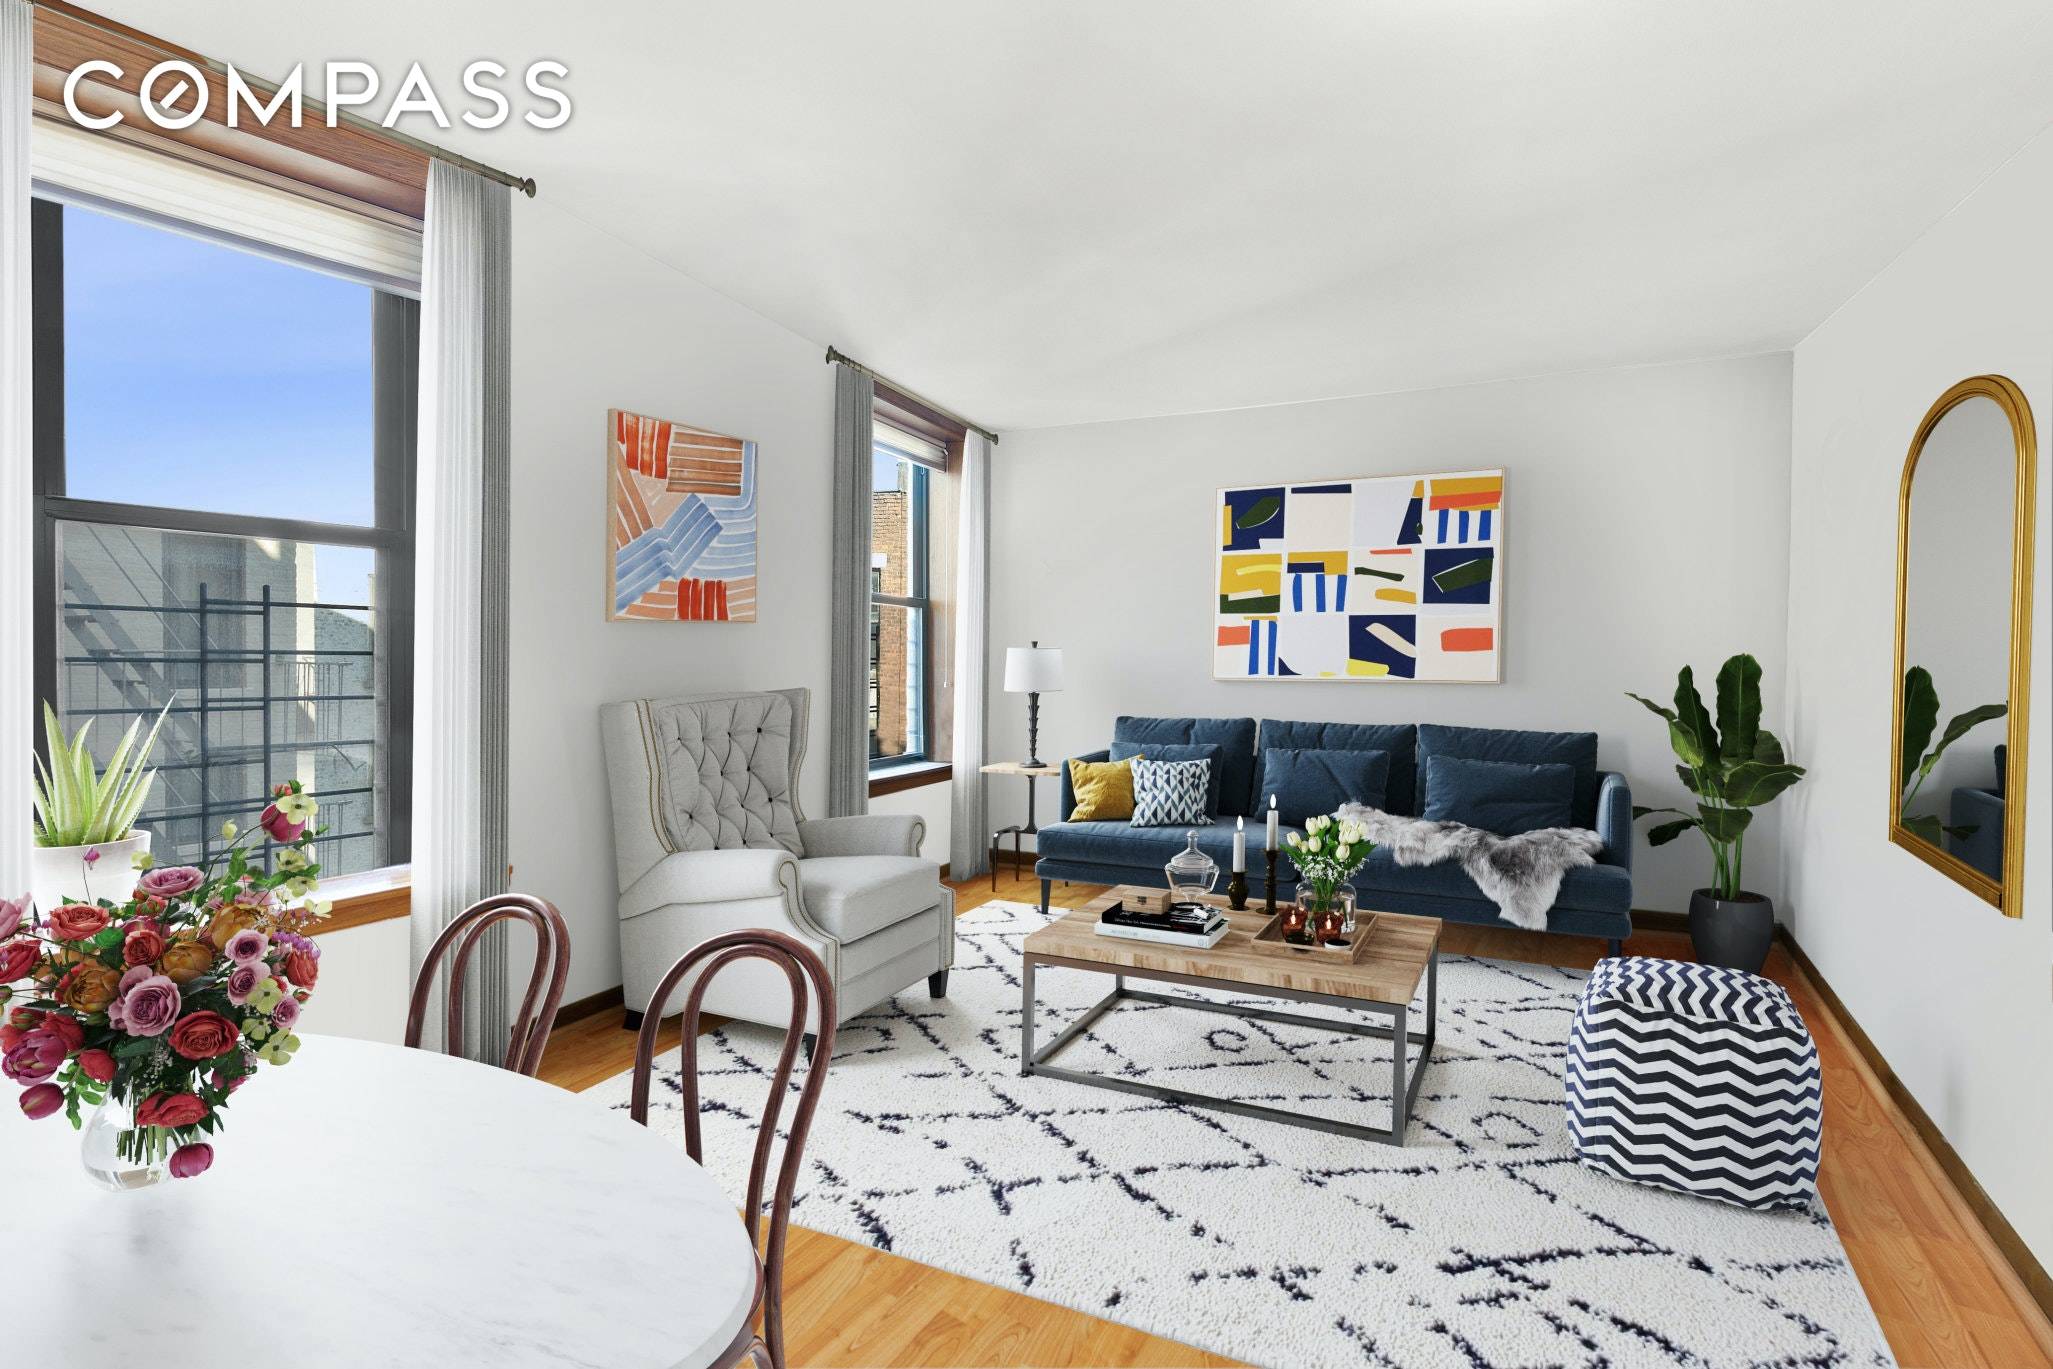 Around the corner from the Brooklyn Museum, right off Washington Avenue is a three bed, two bath light filled apartment filled with charm and space.